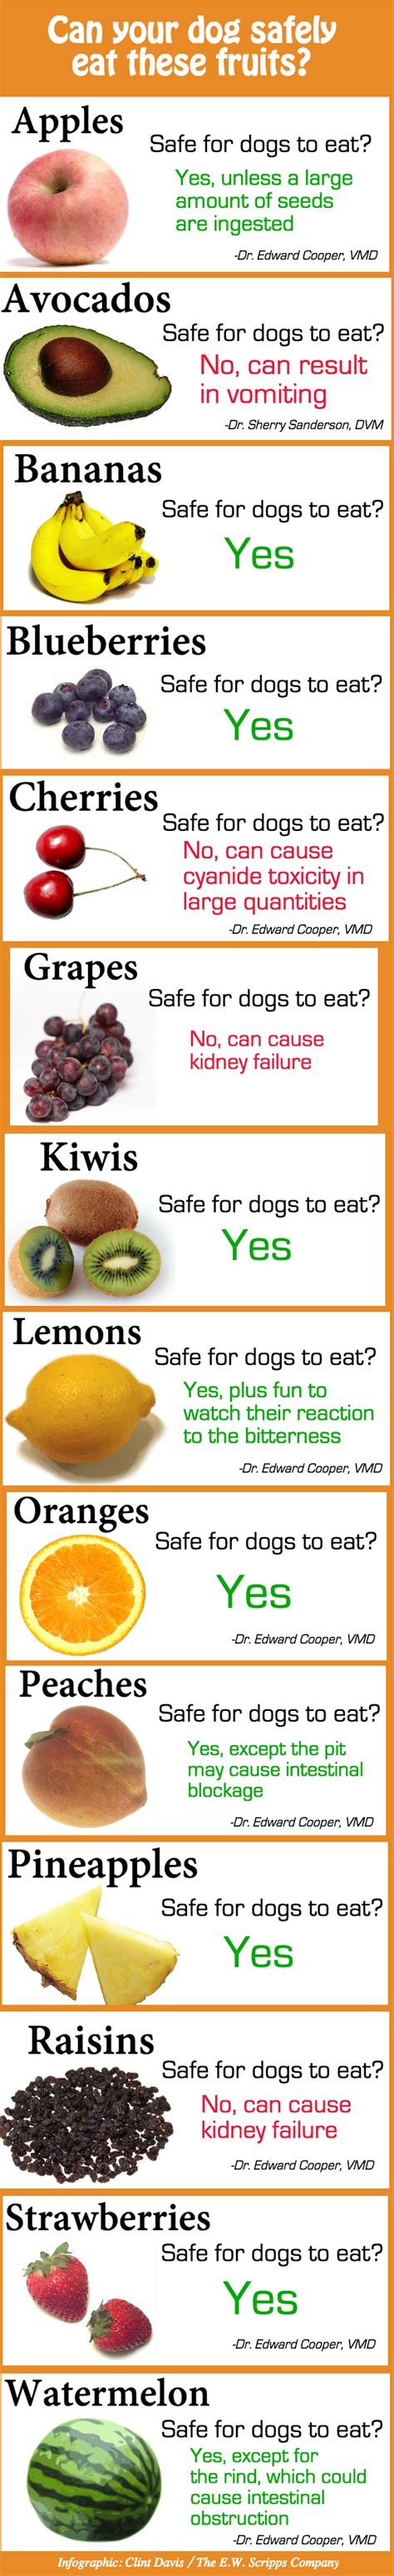 Foods dogs can eat chart. Can Your Dog Safely Eat These Fruits? | beingstray.com